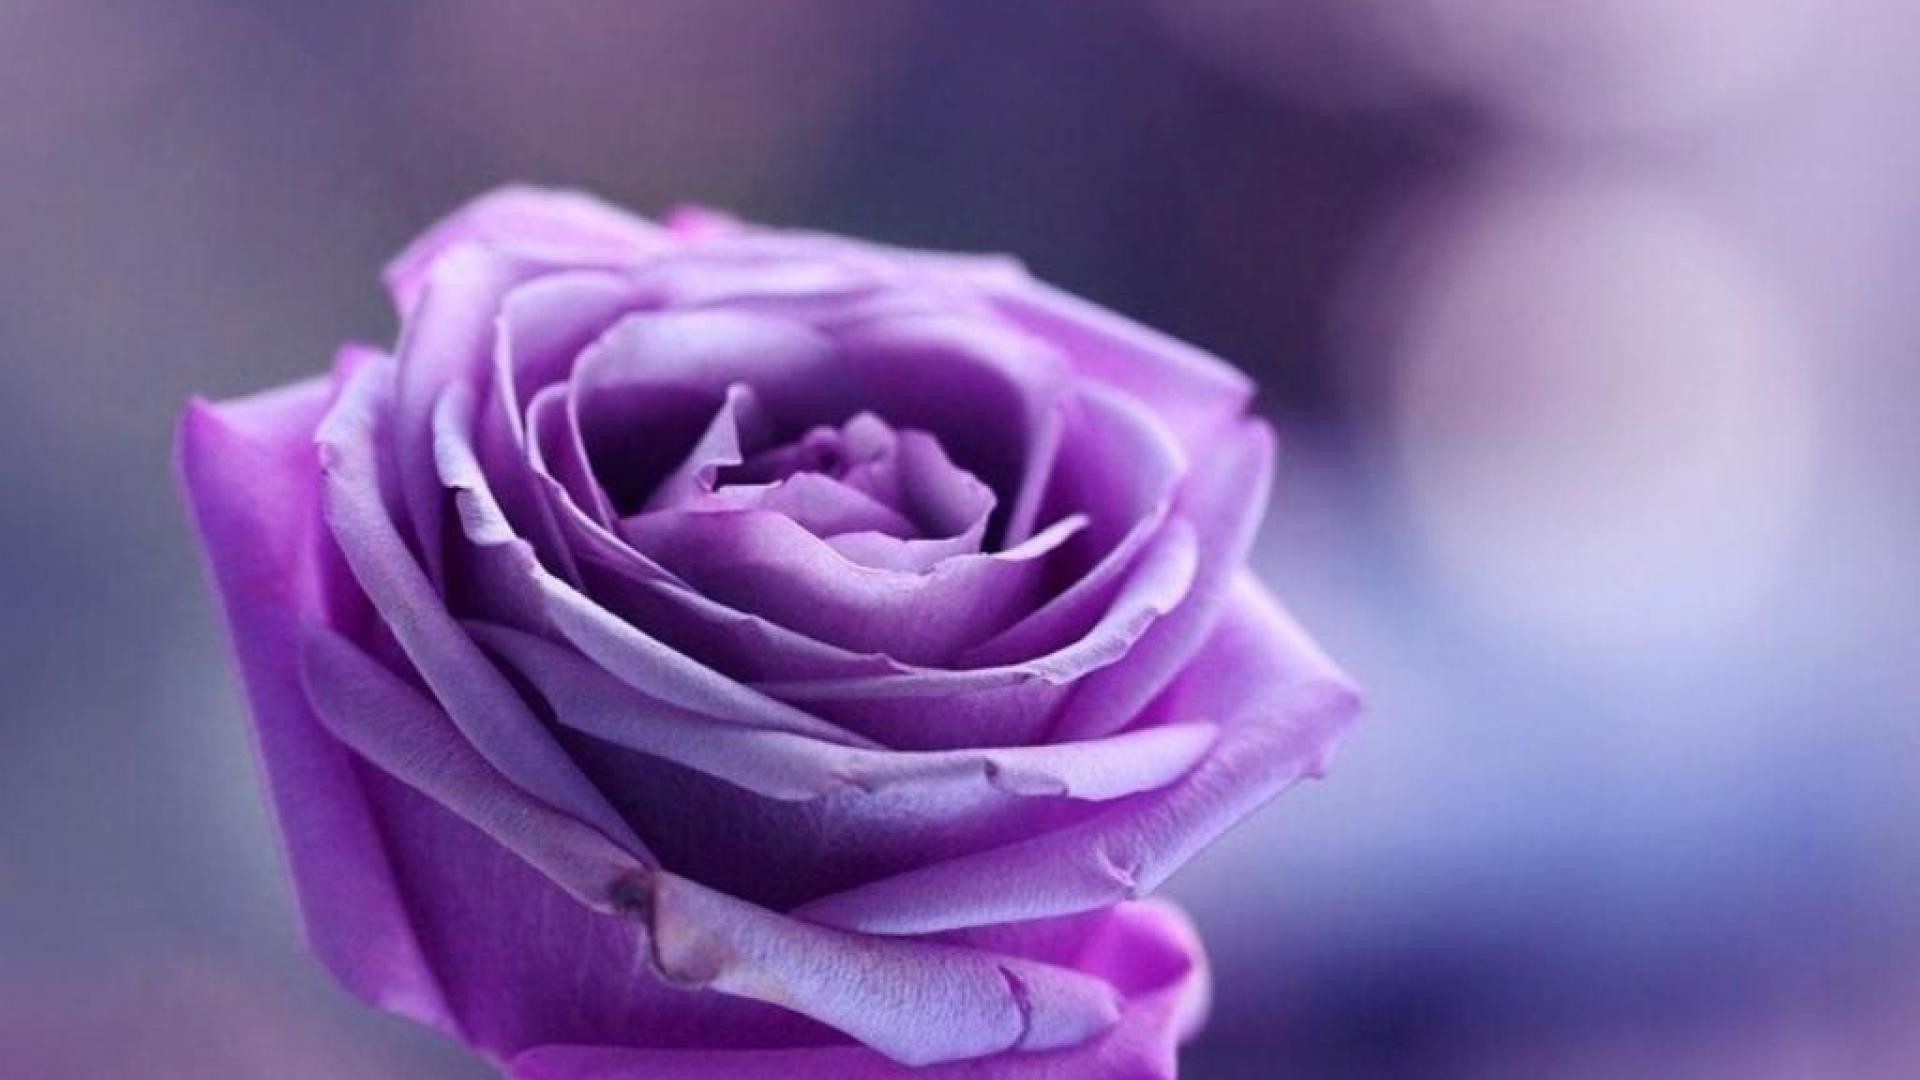 1920x1080 Purple Roses Background - Wallpaper, High Definition, High Quality .